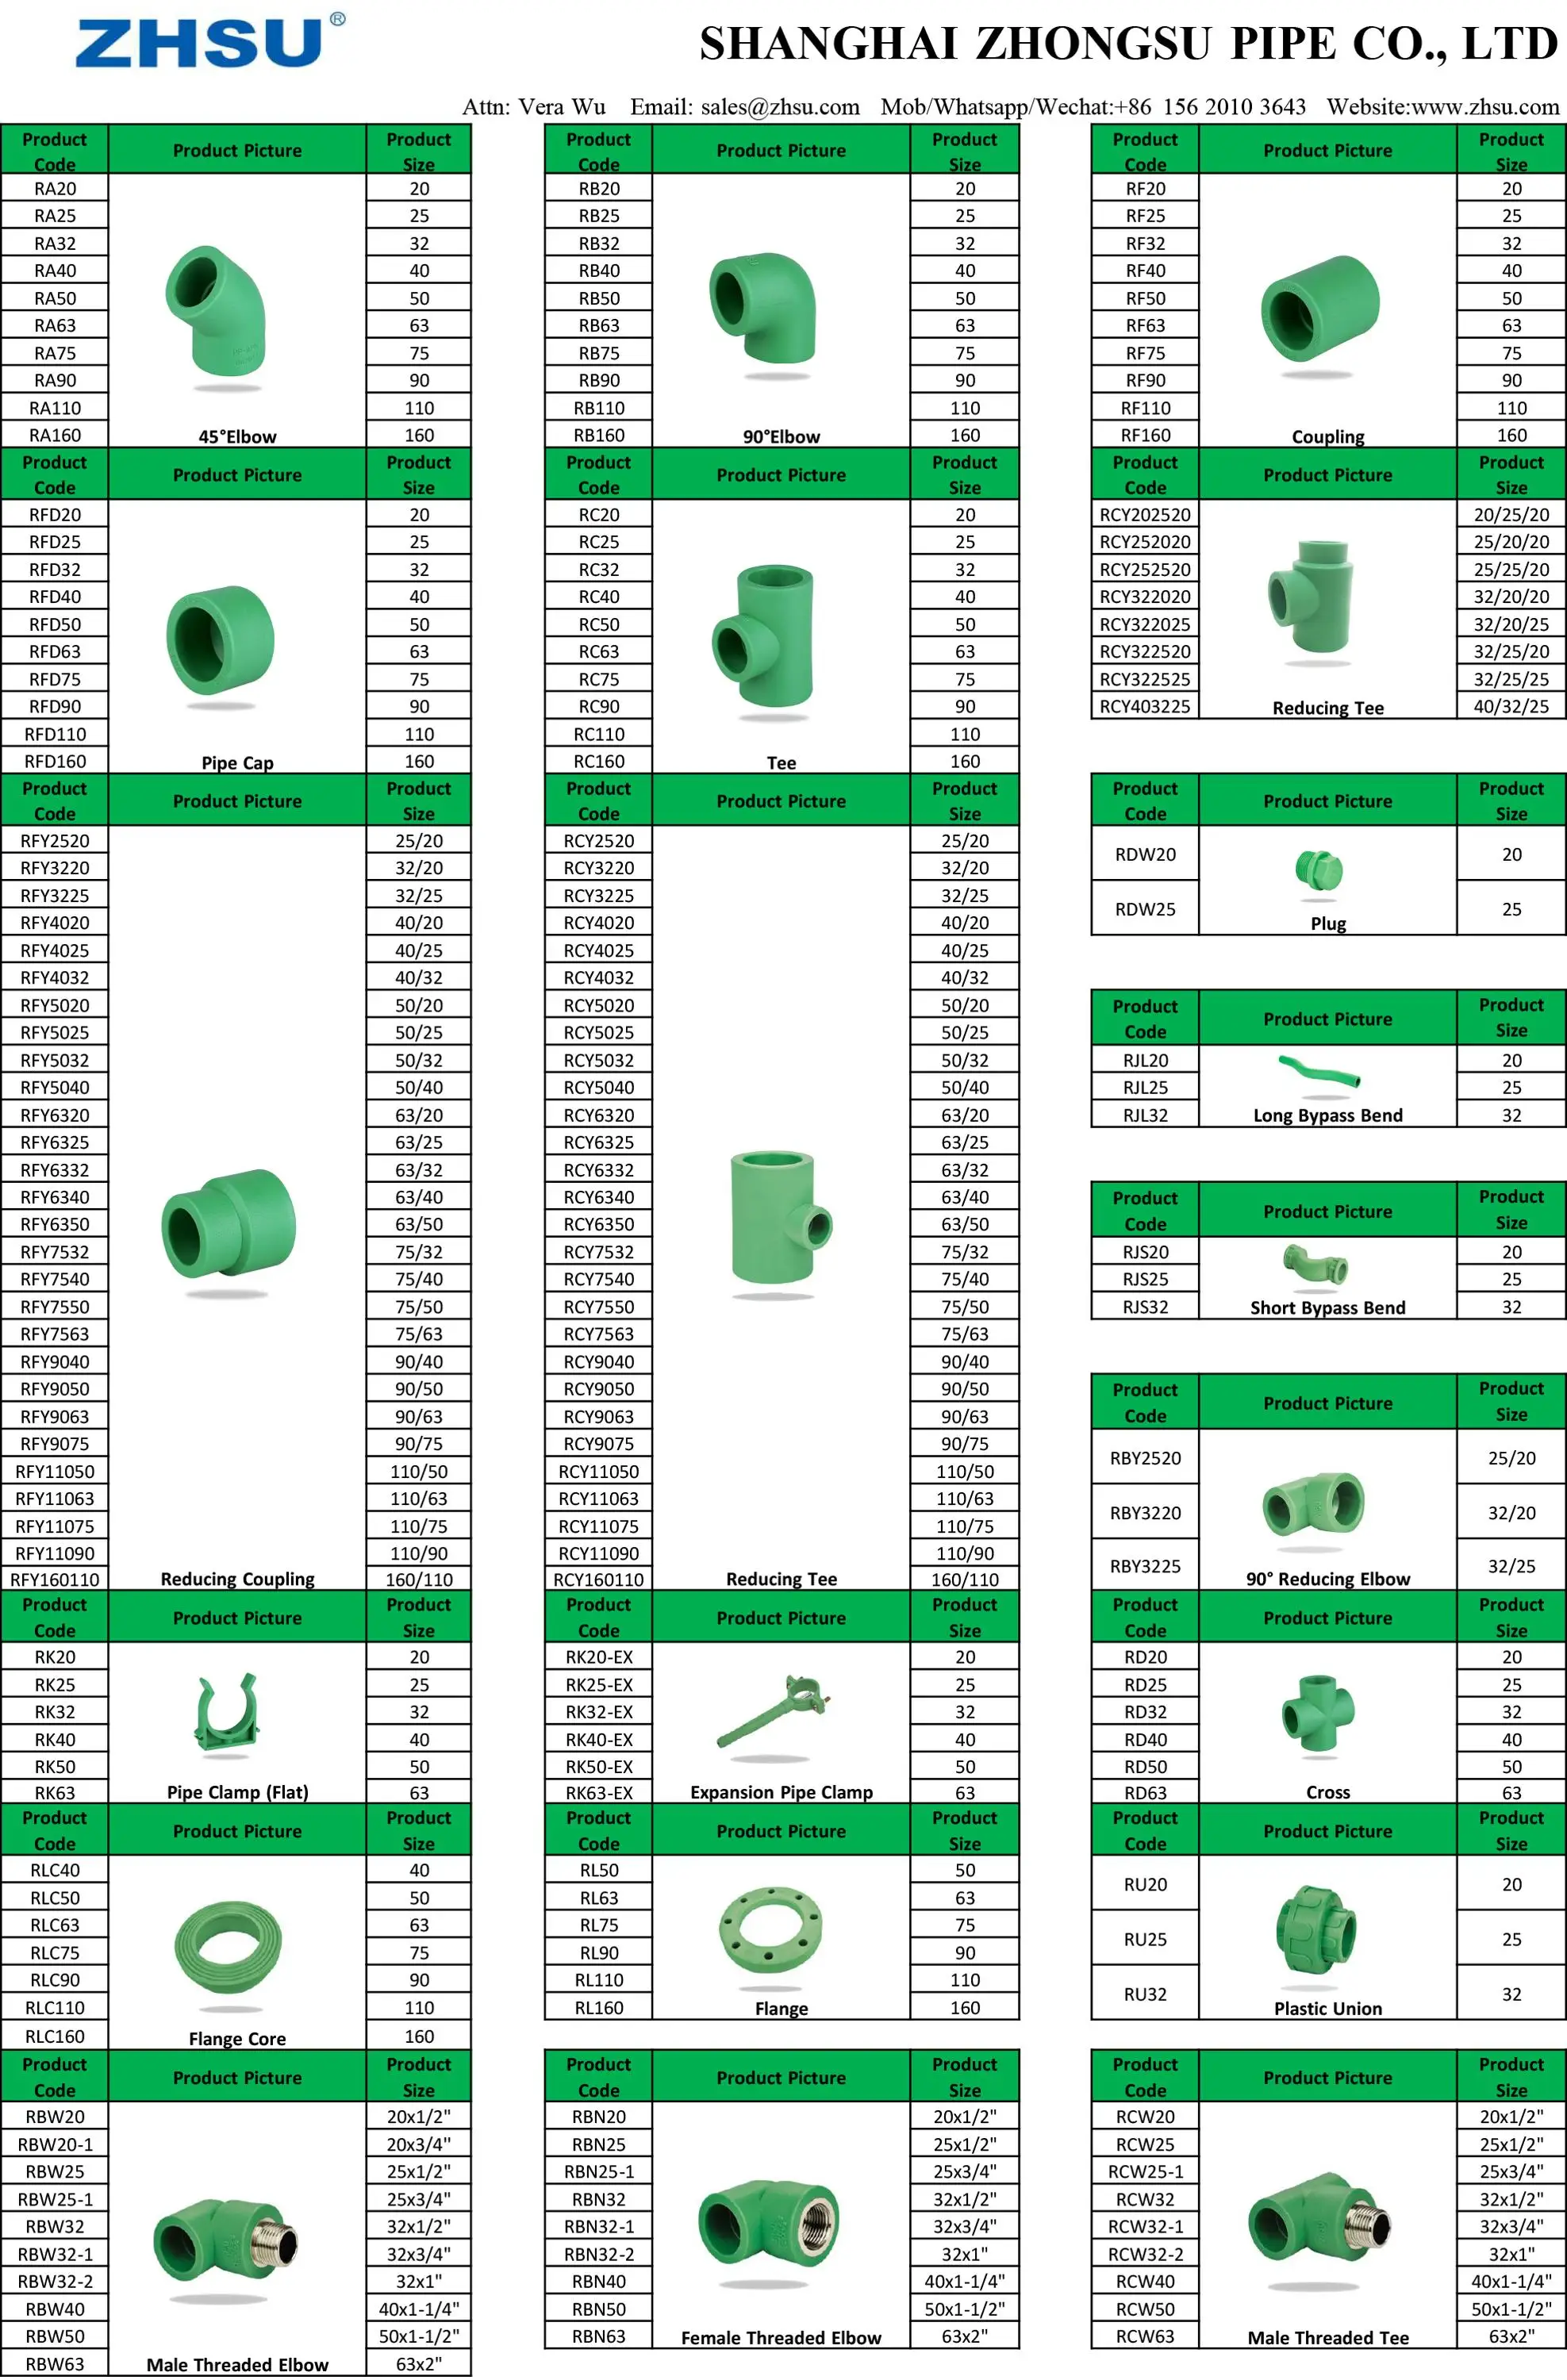 Zhsu Ppr Pipe Fittings Sizes Chart Buy Ppr Pipes And Fittings,Ppr